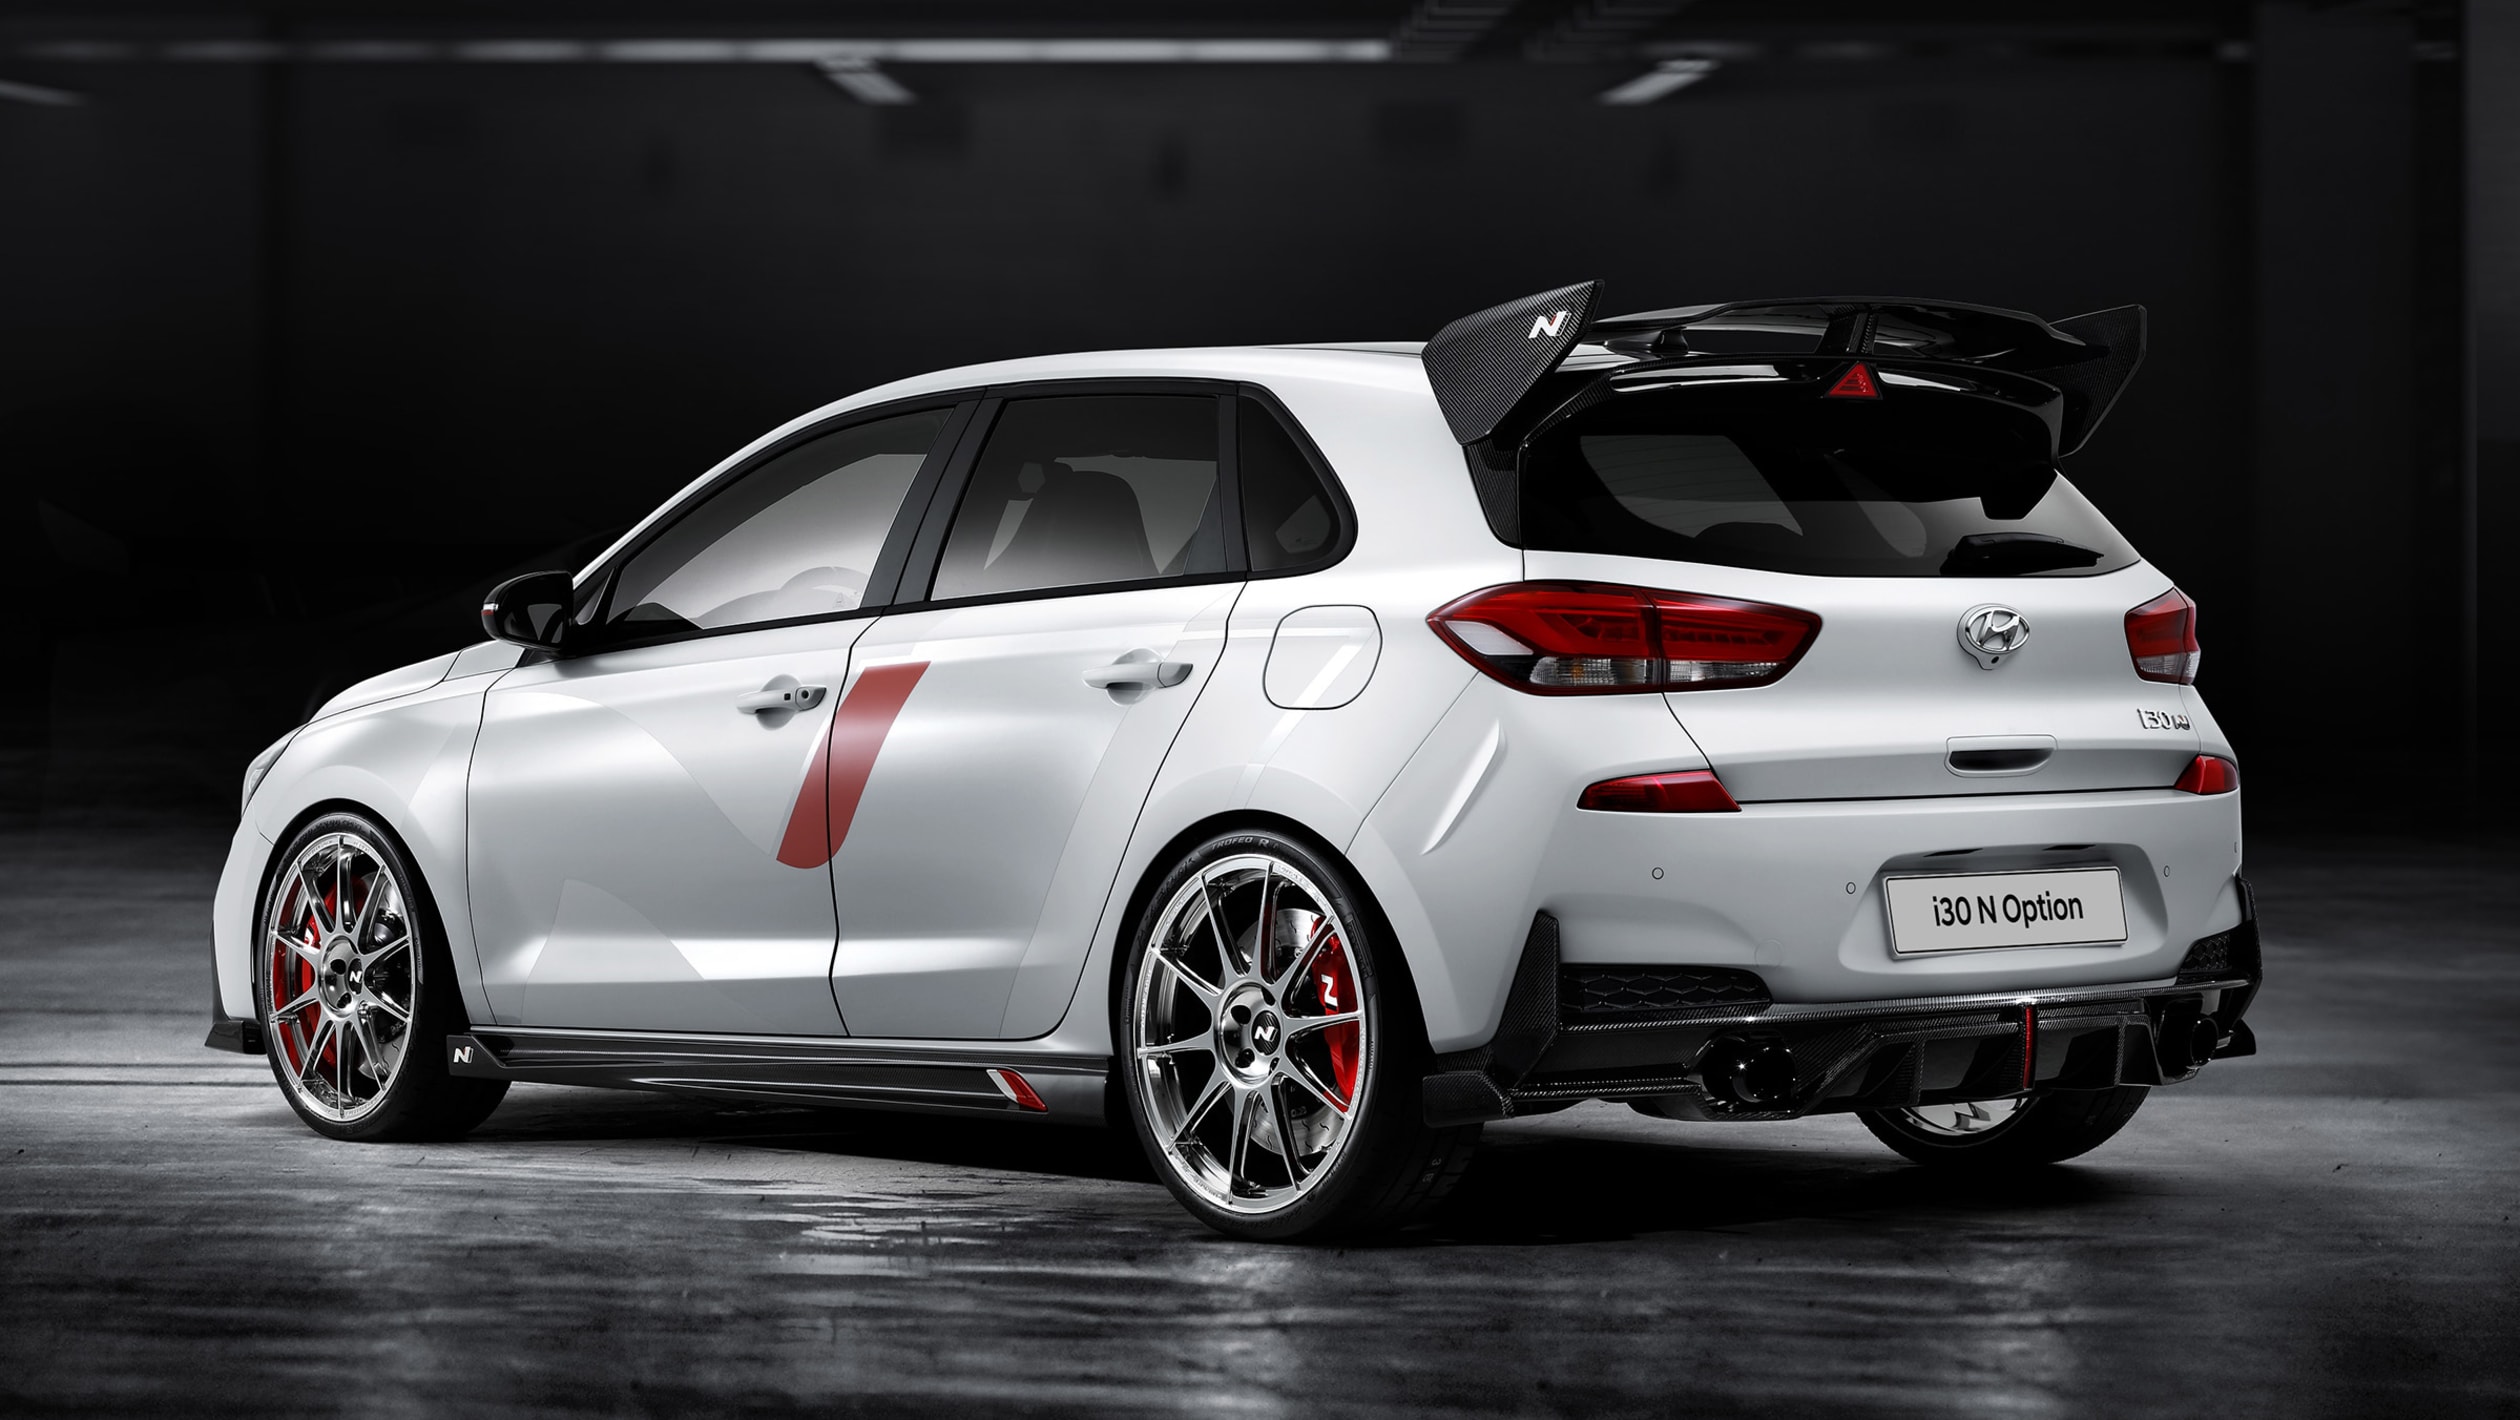 Limited edition Hyundai i30 N Project C launched - pictures | Auto Express